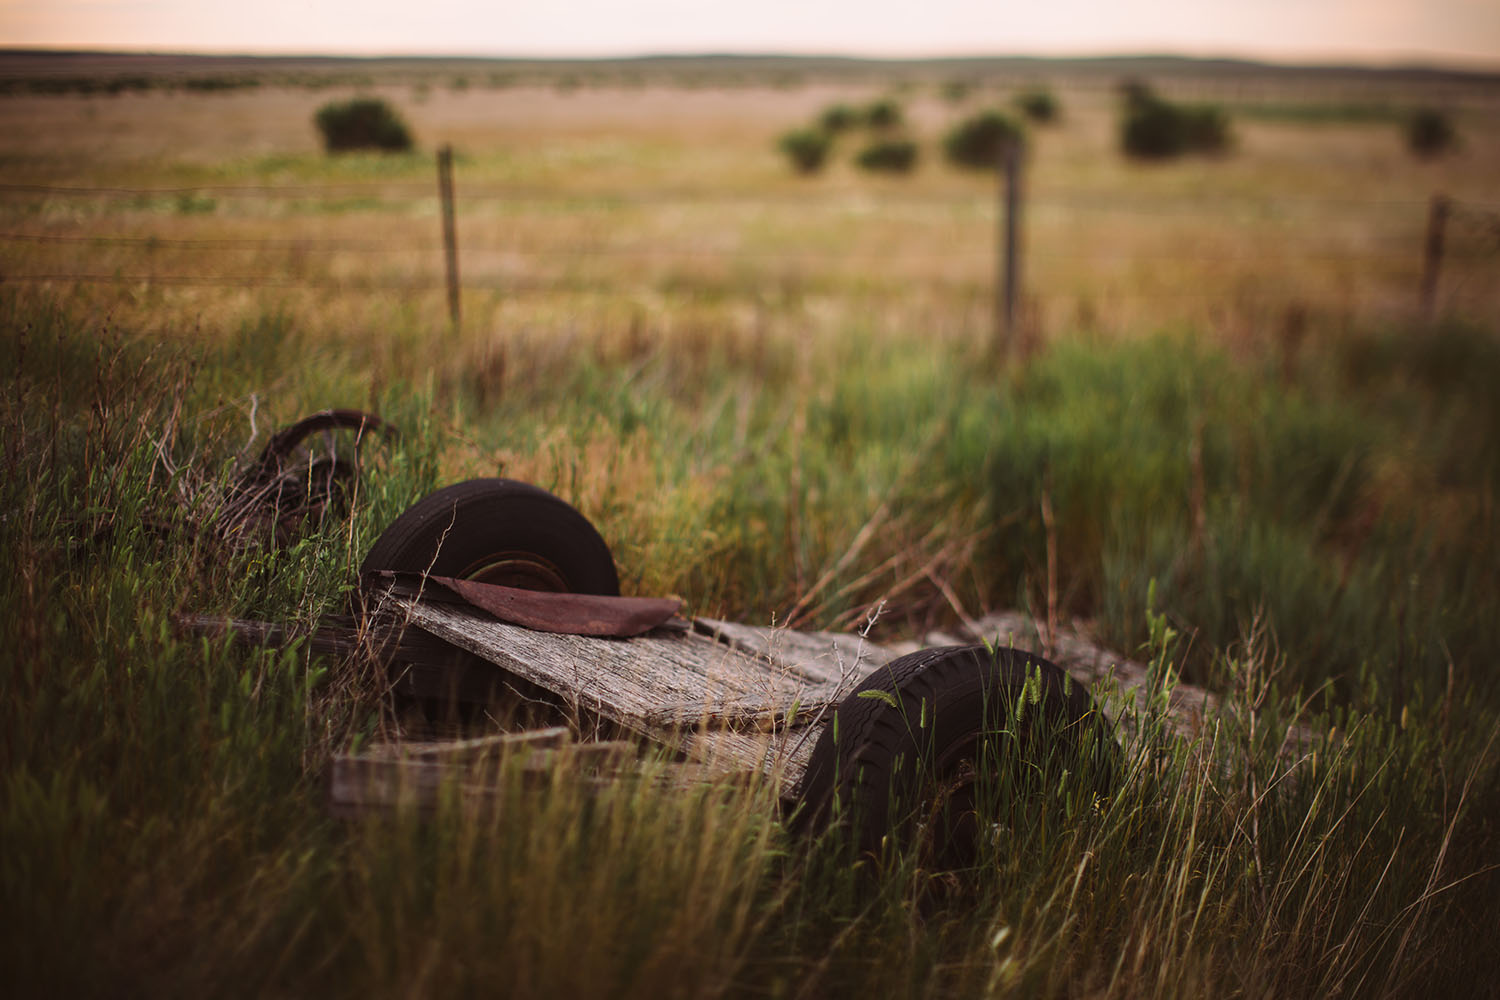 An old wooden trailer sits rotting in a Montana field